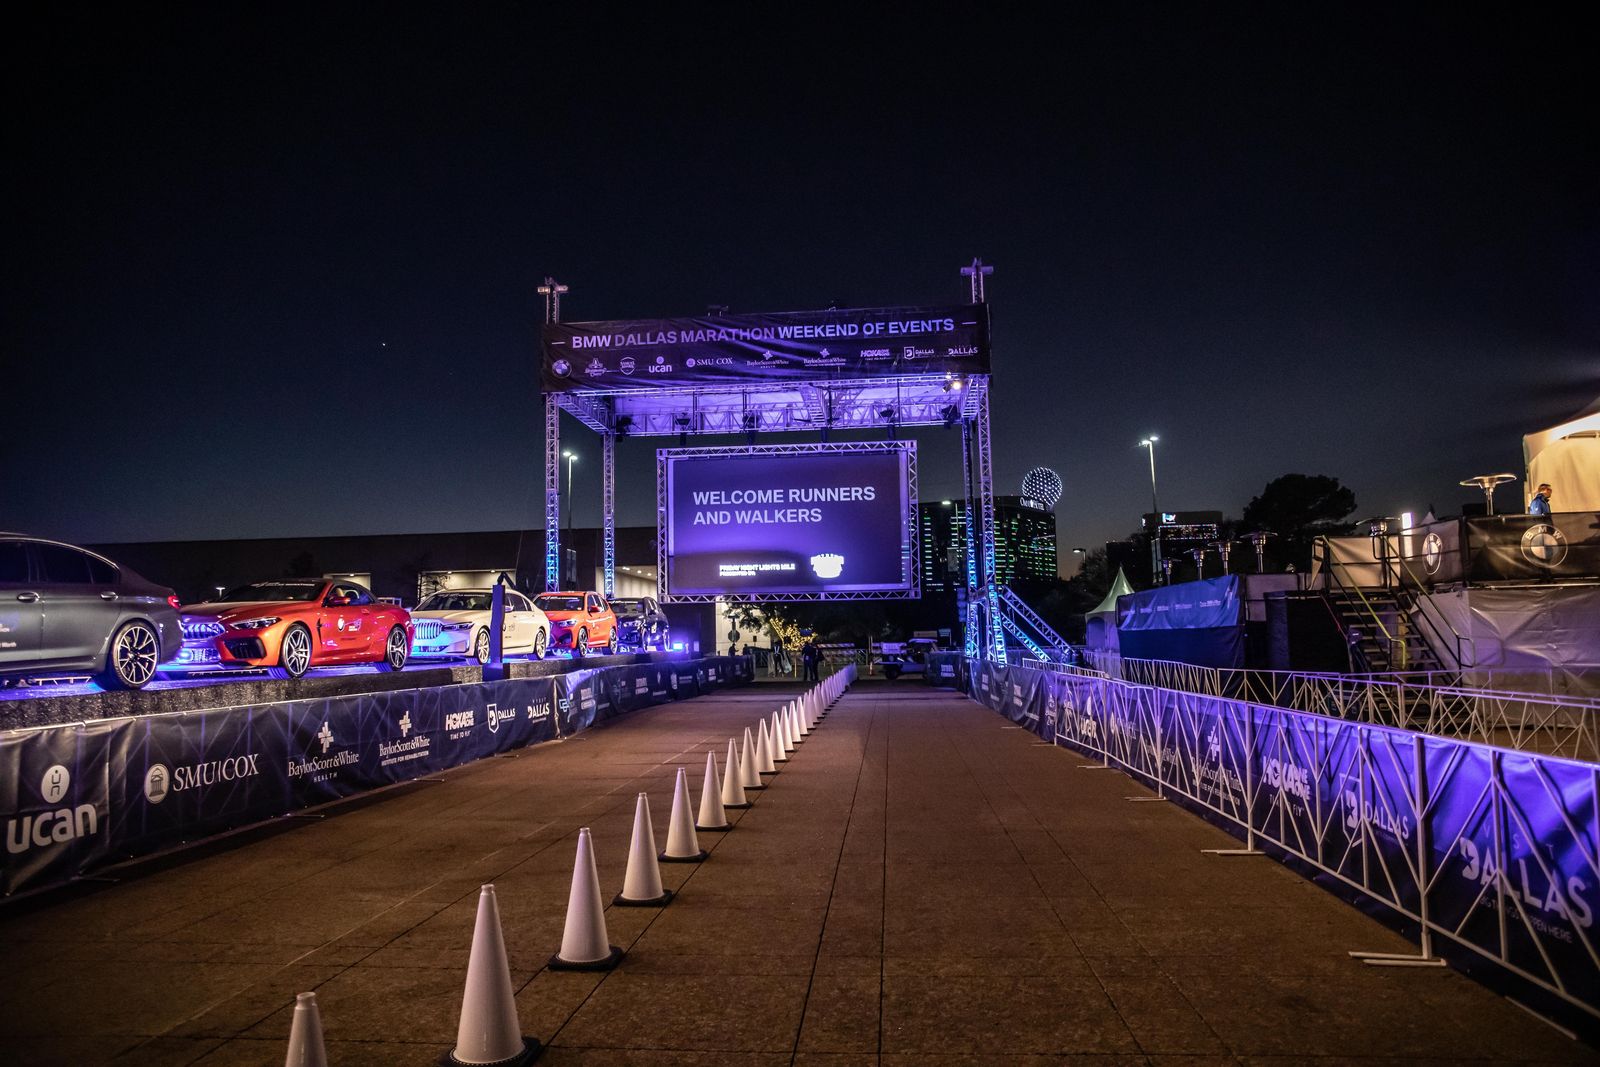 The BMW Dallas Marathon stage and purple professional lighting creates an aura of intensity, ideal for successful sports event production